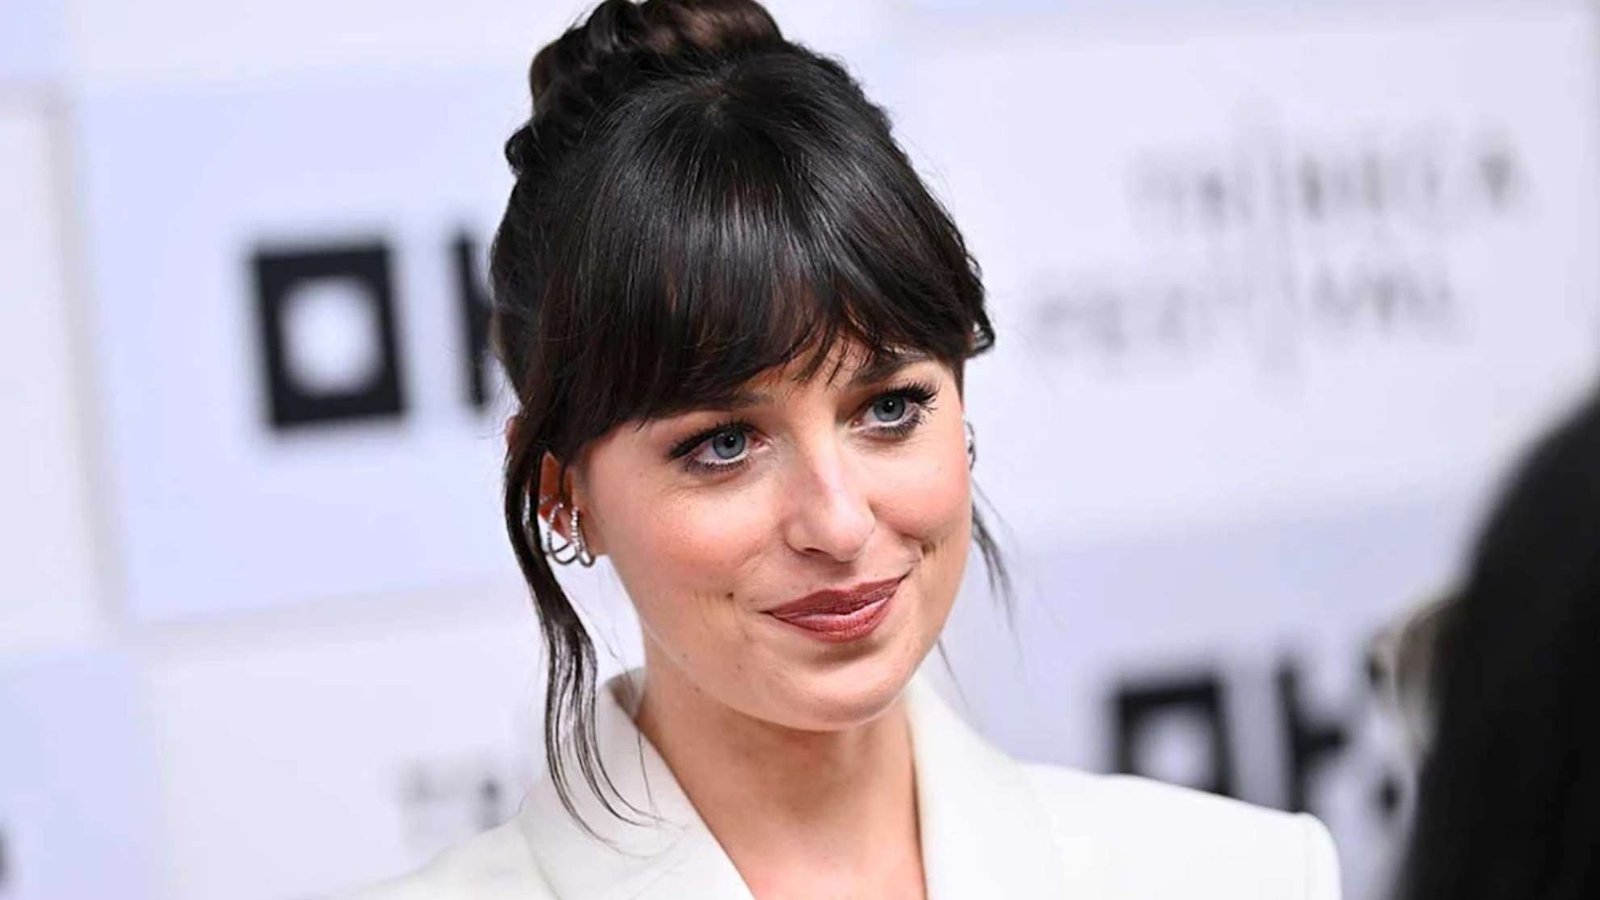 Dakota Johnson Set to Host ‘SNL’ with Justin Timberlake as Featured Musical Guest